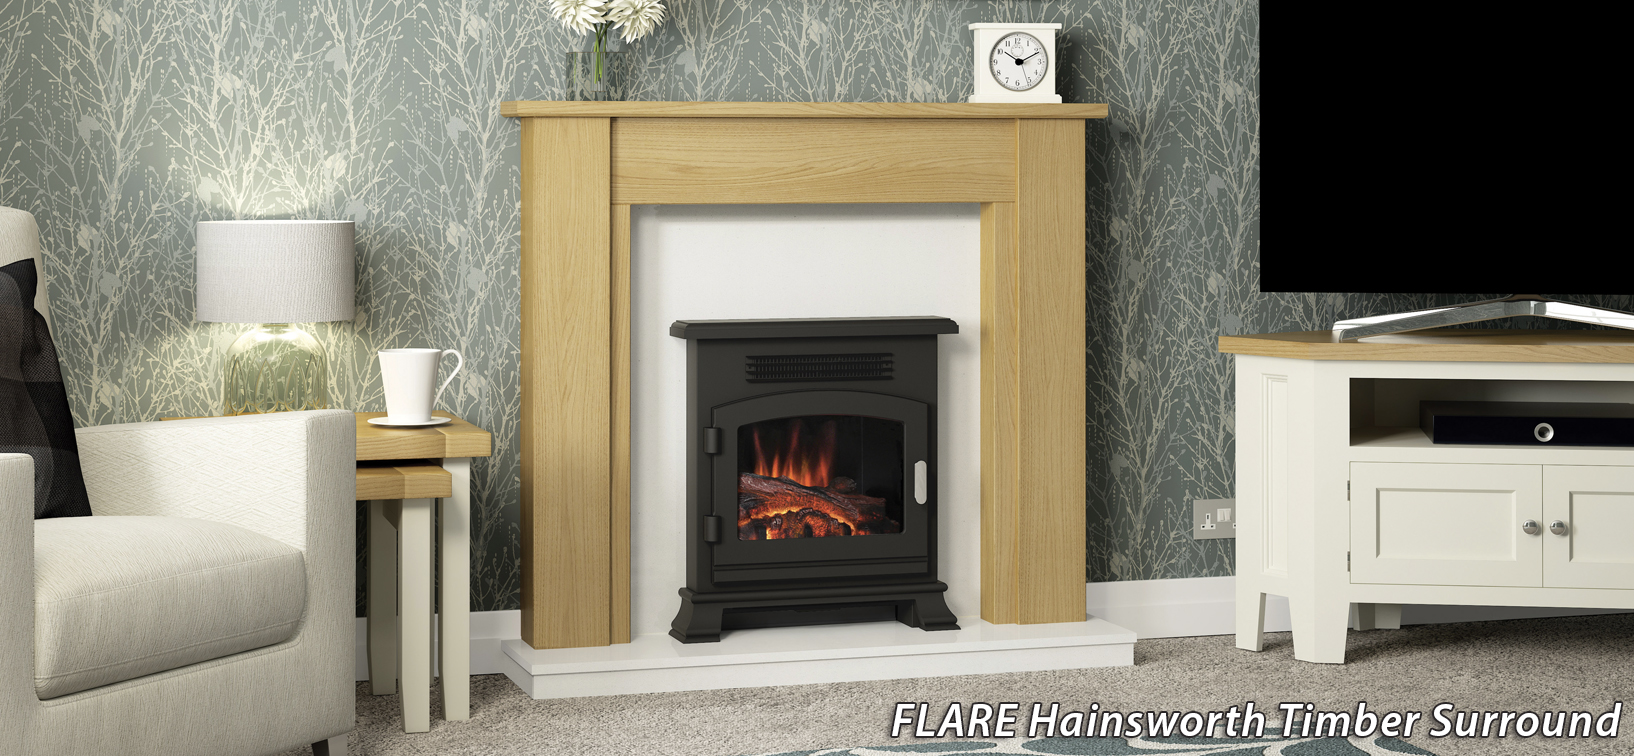 FLARE Hainsworth Timber Fireplace Surround